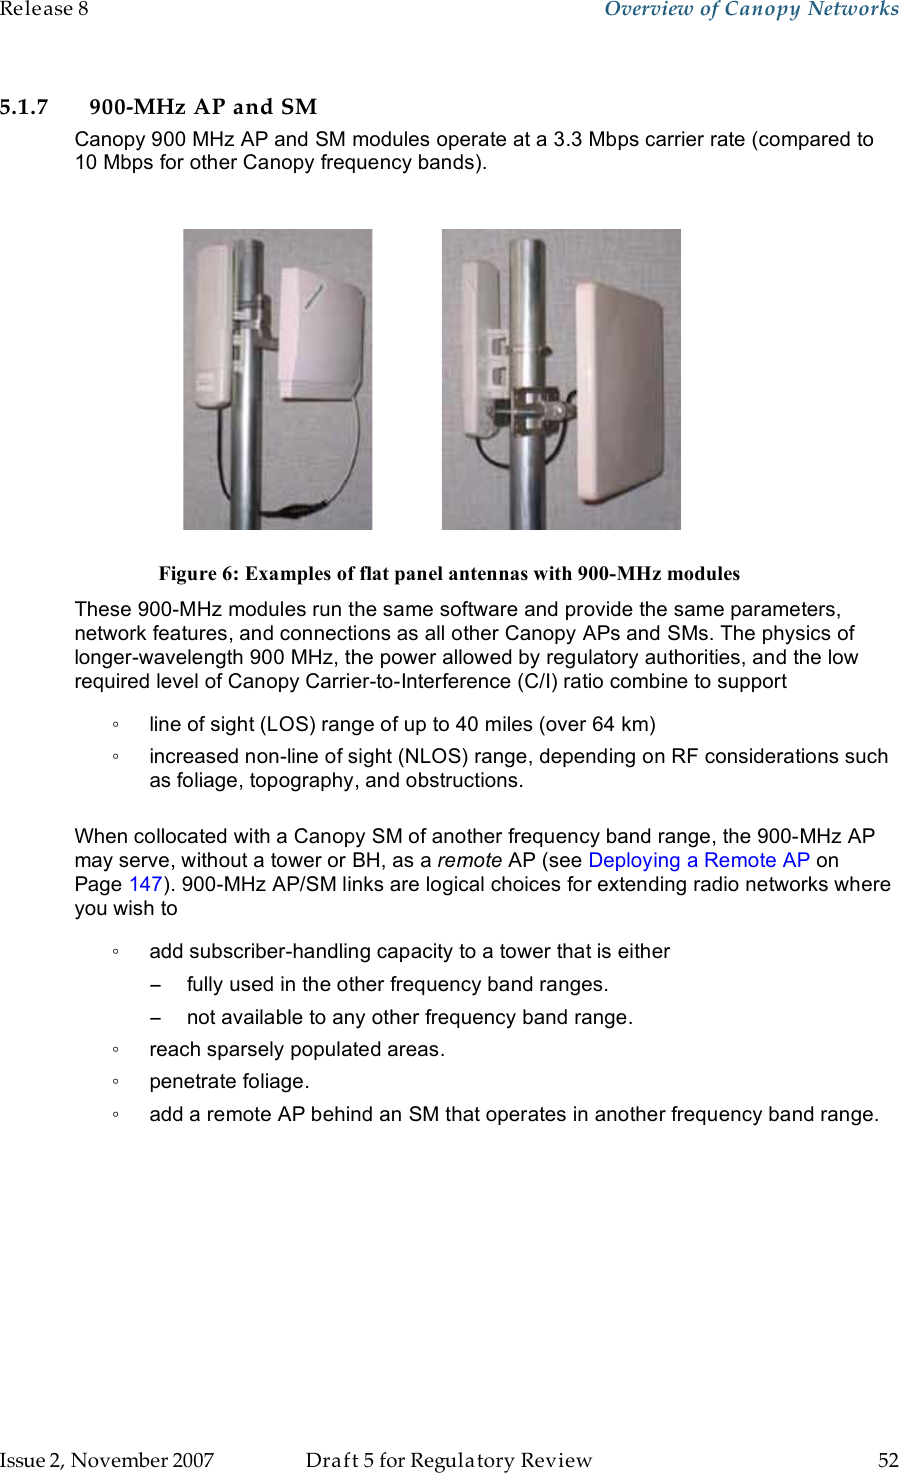 Release 8    Overview of Canopy Networks                  March 200                  Through Software Release 6.   Issue 2, November 2007  Draft 5 for Regulatory Review  52     5.1.7 900-MHz AP and SM Canopy 900 MHz AP and SM modules operate at a 3.3 Mbps carrier rate (compared to 10 Mbps for other Canopy frequency bands).     Figure 6: Examples of flat panel antennas with 900-MHz modules These 900-MHz modules run the same software and provide the same parameters, network features, and connections as all other Canopy APs and SMs. The physics of longer-wavelength 900 MHz, the power allowed by regulatory authorities, and the low required level of Canopy Carrier-to-Interference (C/I) ratio combine to support ◦  line of sight (LOS) range of up to 40 miles (over 64 km) ◦  increased non-line of sight (NLOS) range, depending on RF considerations such as foliage, topography, and obstructions.  When collocated with a Canopy SM of another frequency band range, the 900-MHz AP may serve, without a tower or BH, as a remote AP (see Deploying a Remote AP on Page 147). 900-MHz AP/SM links are logical choices for extending radio networks where you wish to ◦  add subscriber-handling capacity to a tower that is either −  fully used in the other frequency band ranges. −  not available to any other frequency band range. ◦  reach sparsely populated areas. ◦  penetrate foliage. ◦  add a remote AP behind an SM that operates in another frequency band range. 